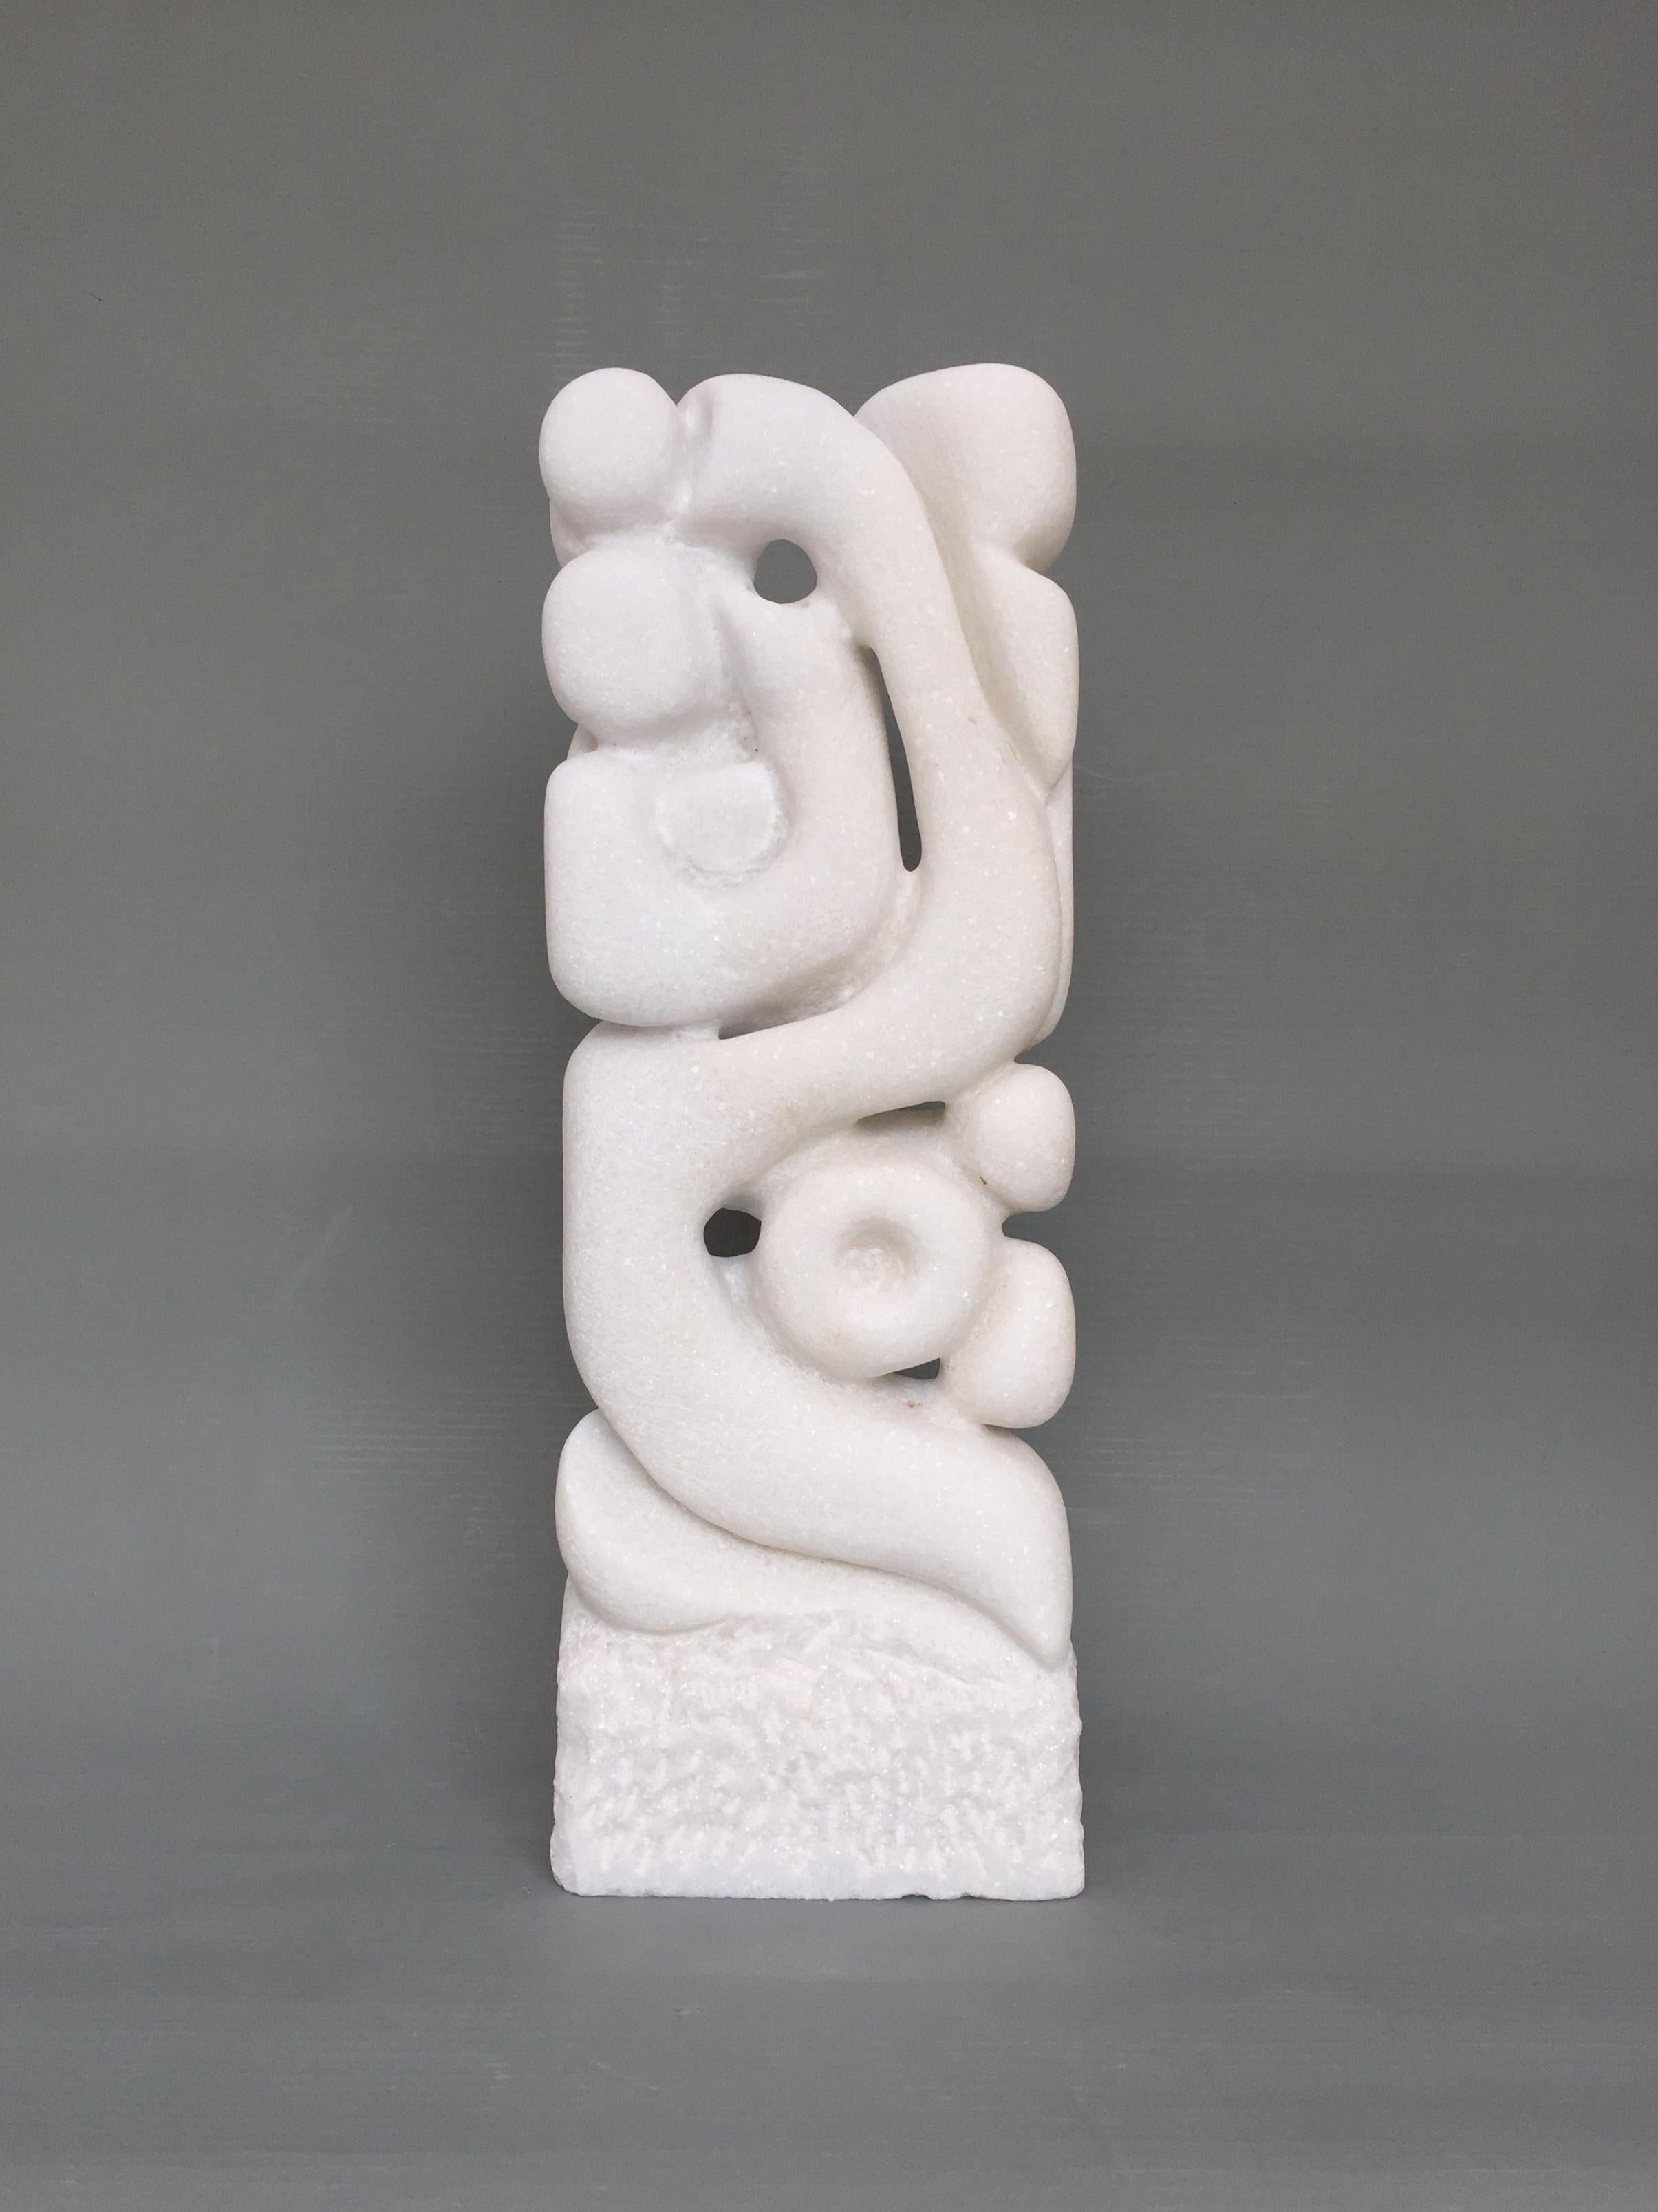 Laokoon, 2018 marble sculpture by Tom von Kaenel
Dimensions: D 10 x W 21.5 x H 62 cm
Materials: Naxian marble

All the artworks of Tom von Kaenel are unique, handcrafted by himself.
The stones all come from the surrounding marble quarries of